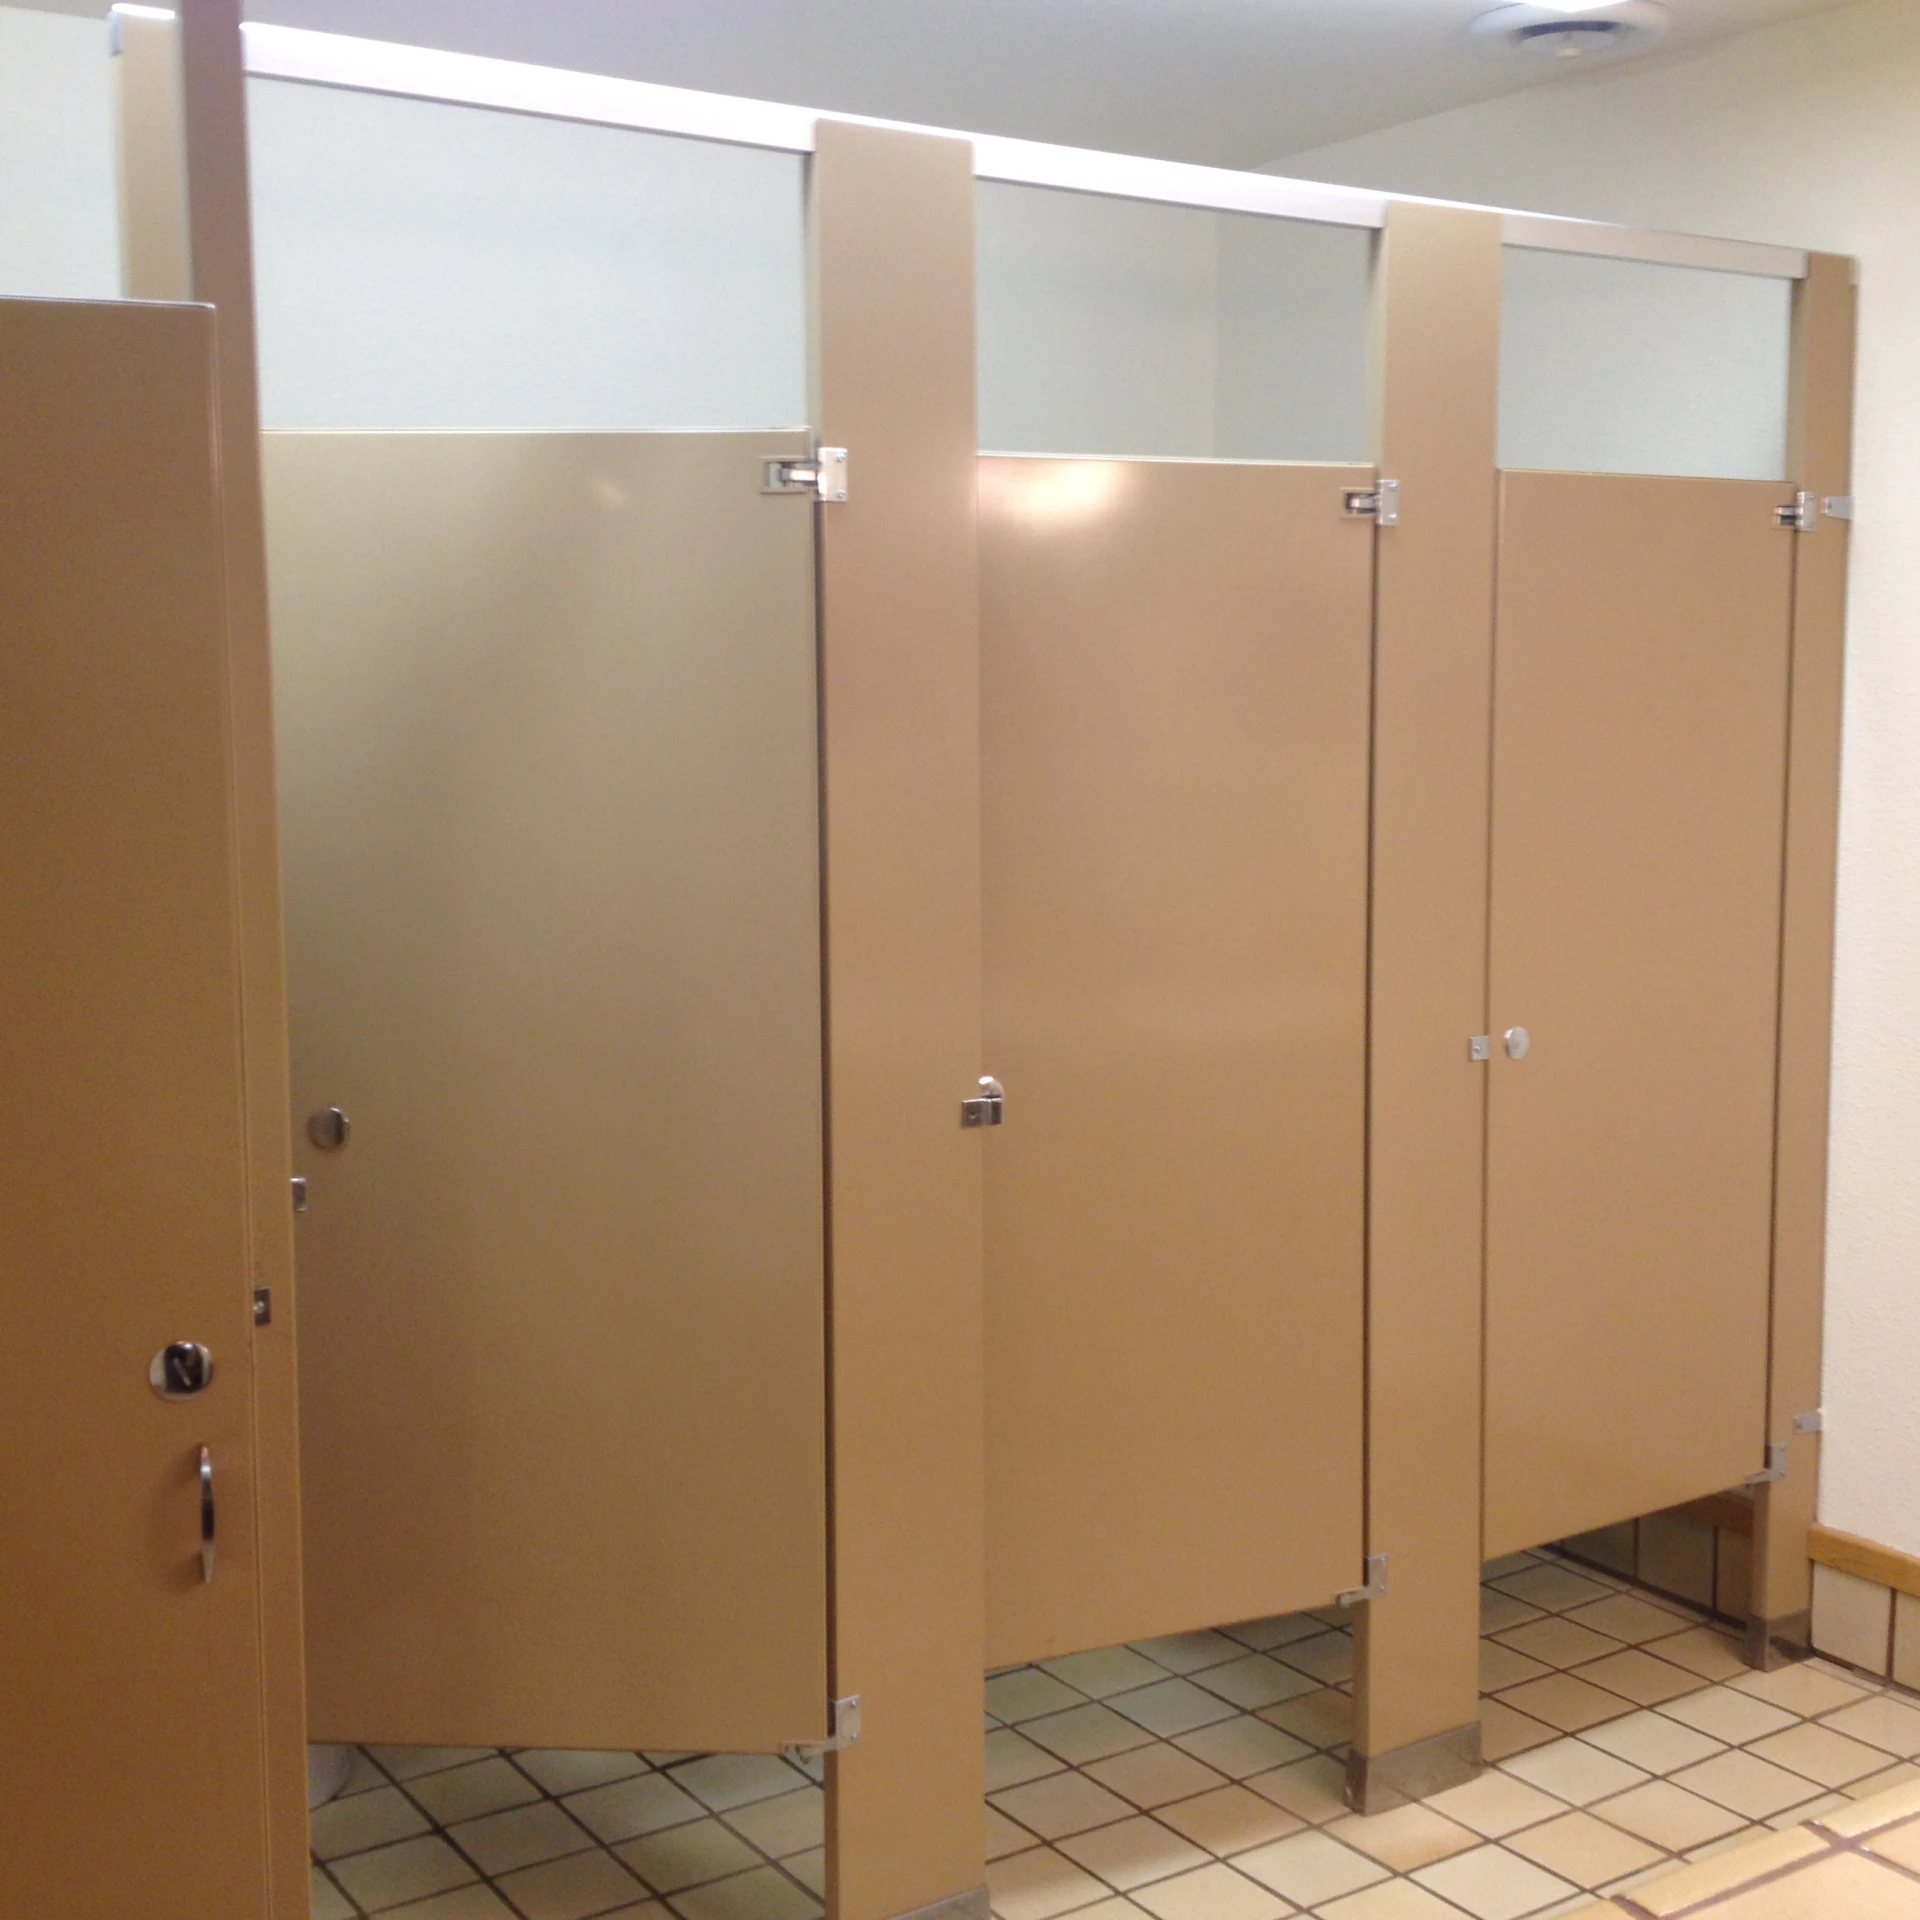 a bunch of restroom stalls in a building